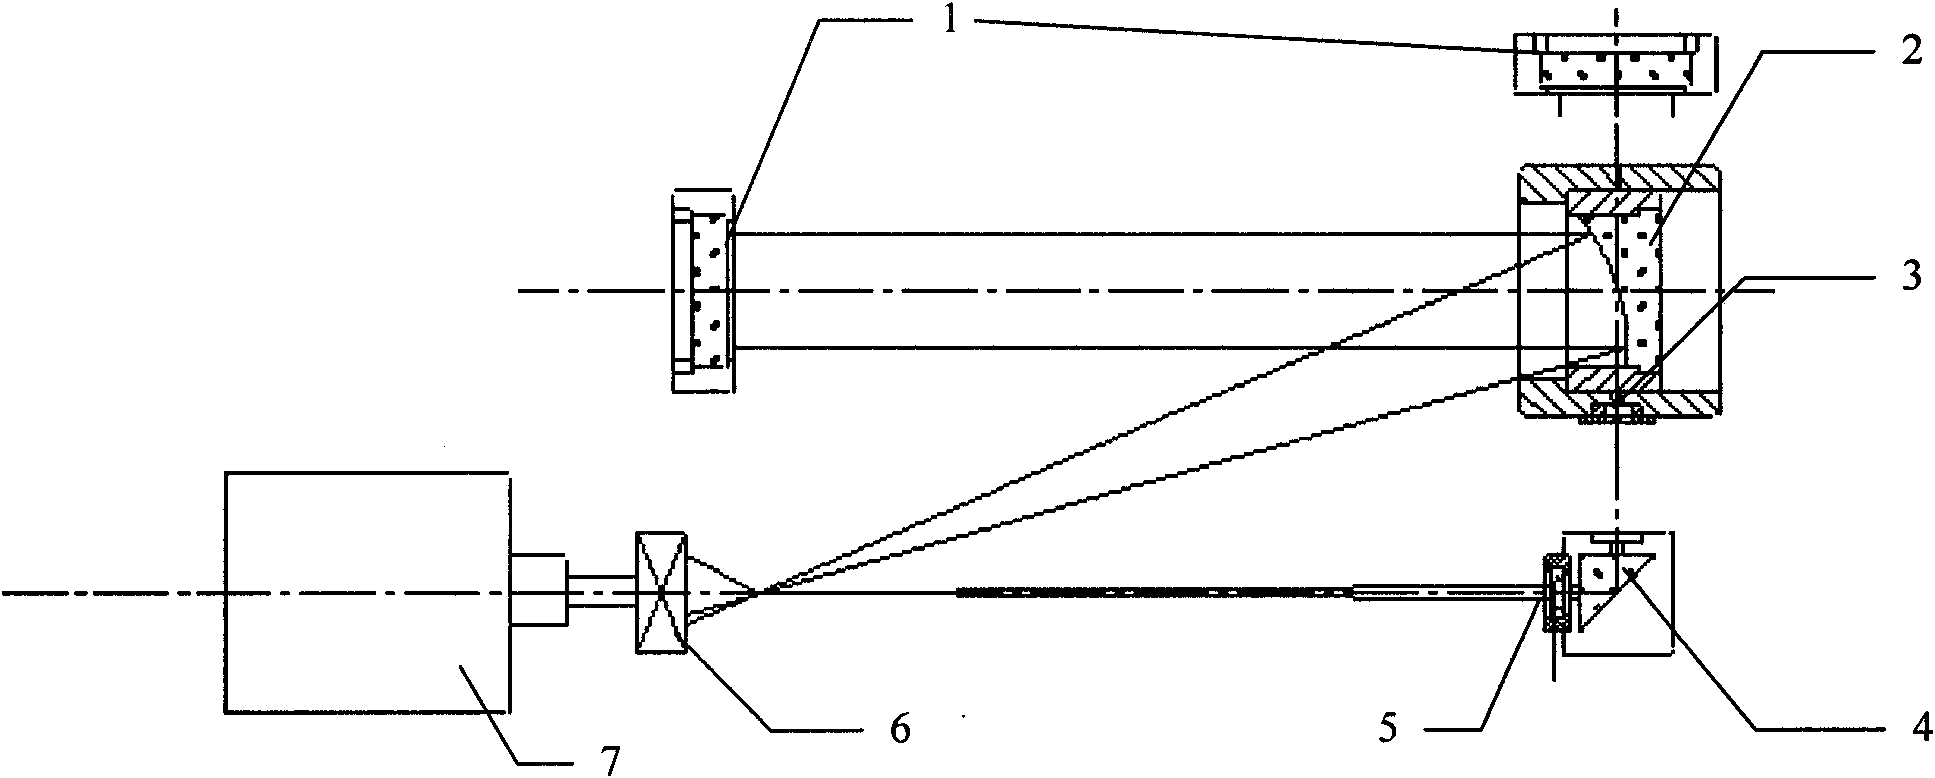 Large-caliber off-axis non-spherical measuring and calibration system